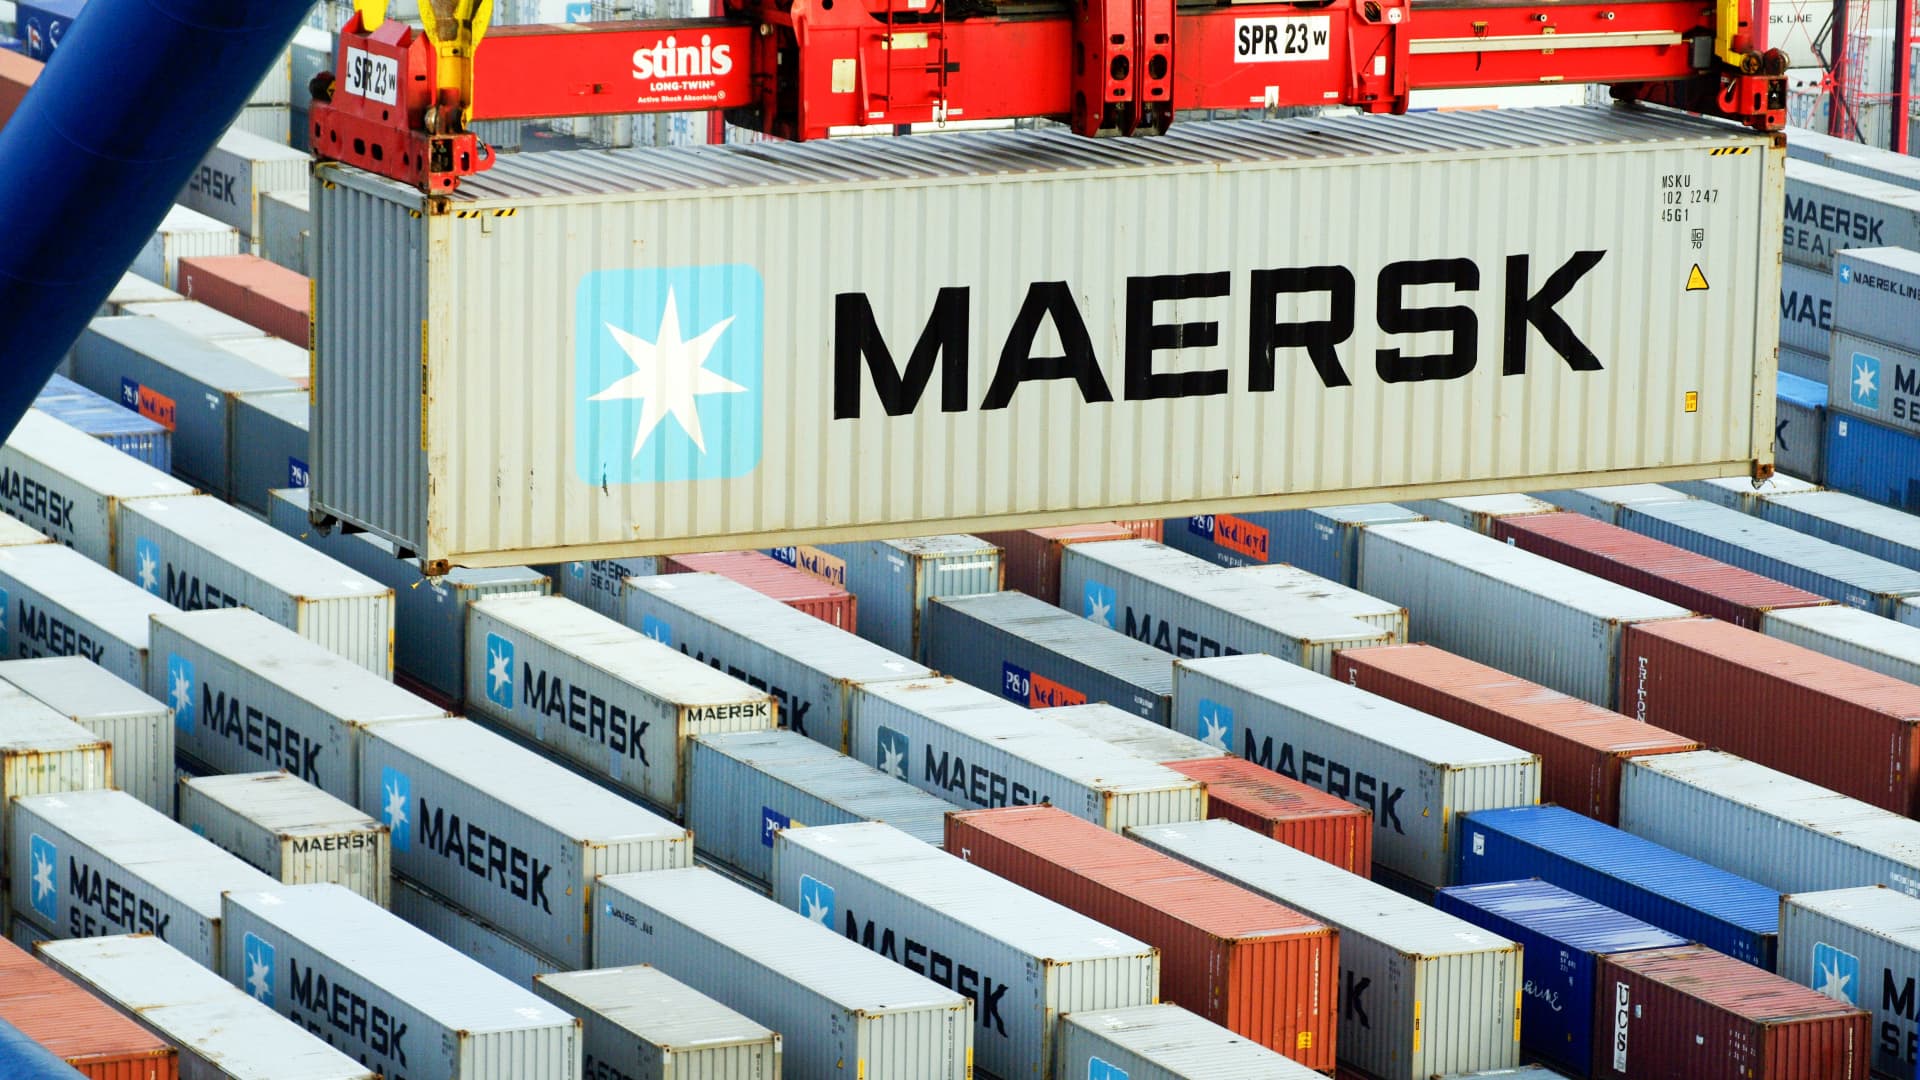 Shipping giant Maersk to add SpaceX’s Starlink internet to more than 330 ships by early next year